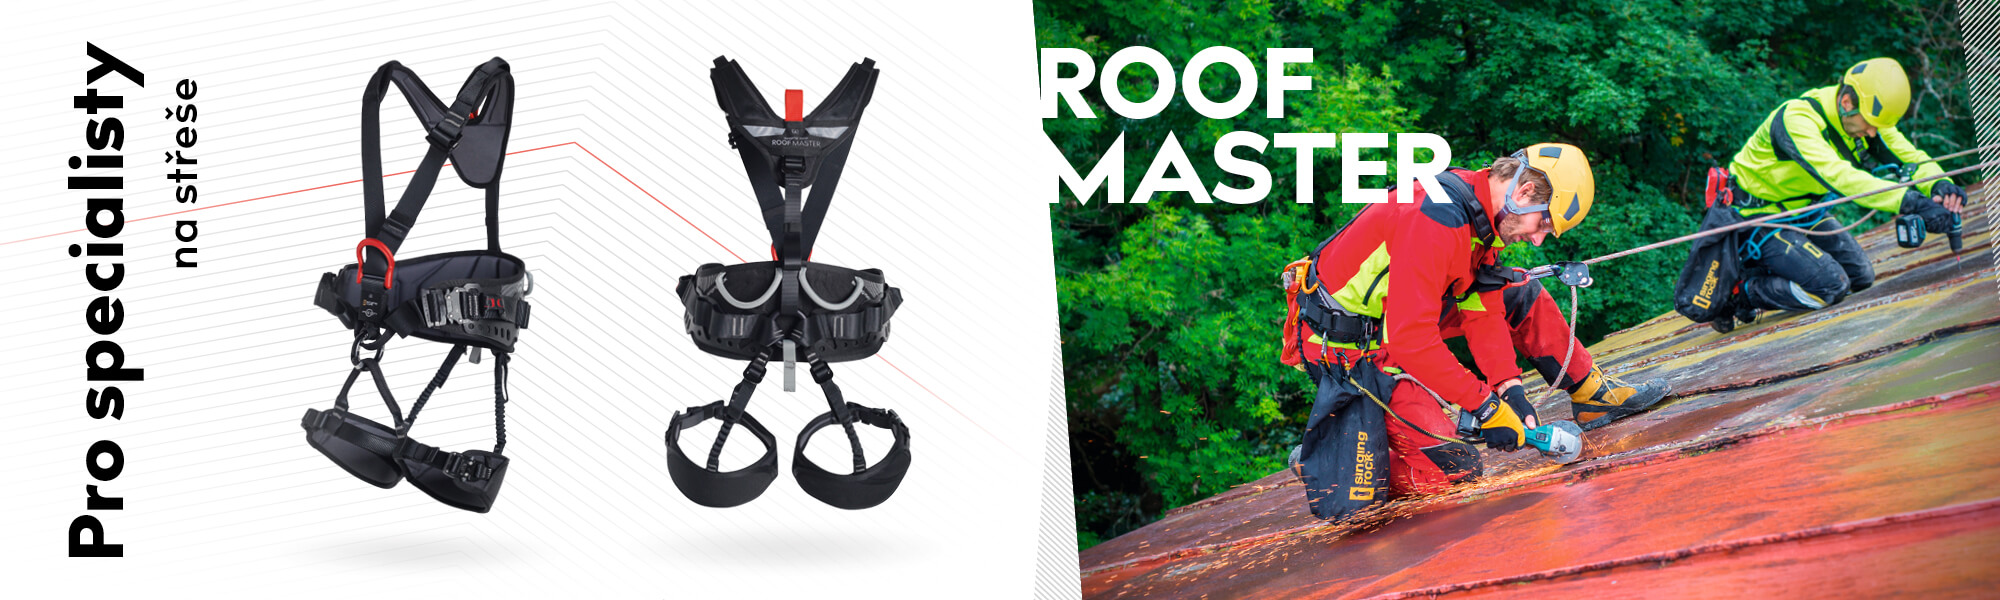 ROOF MASTER